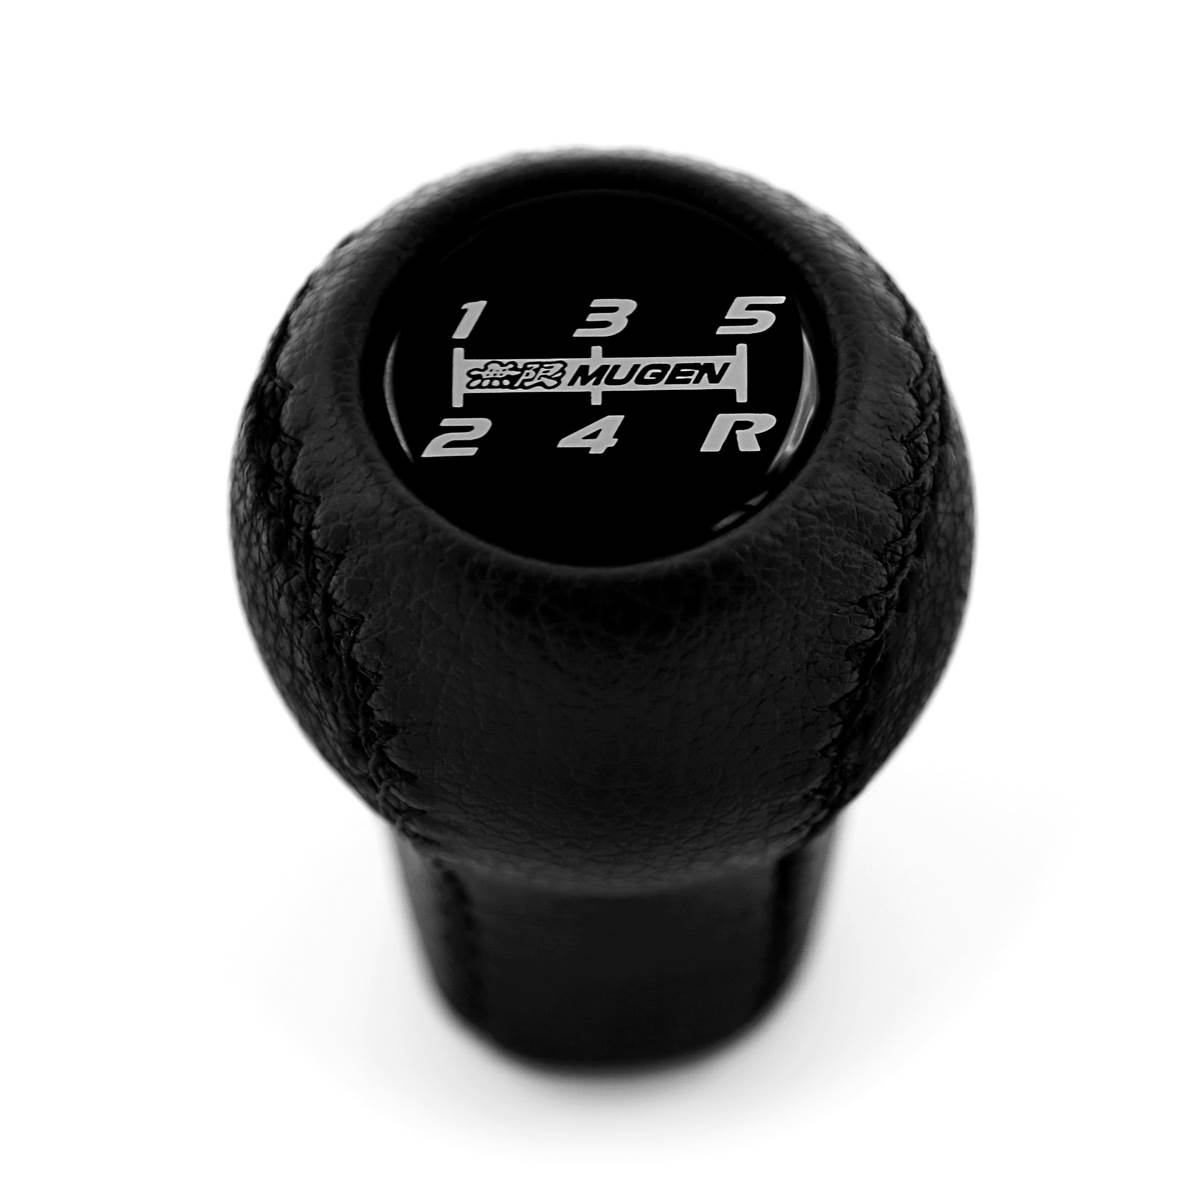 Gear Stick Shifter 5 Speed Gear Shift Knob Head Lever Cover for Mugen Style Fits for HONDA CIVIC